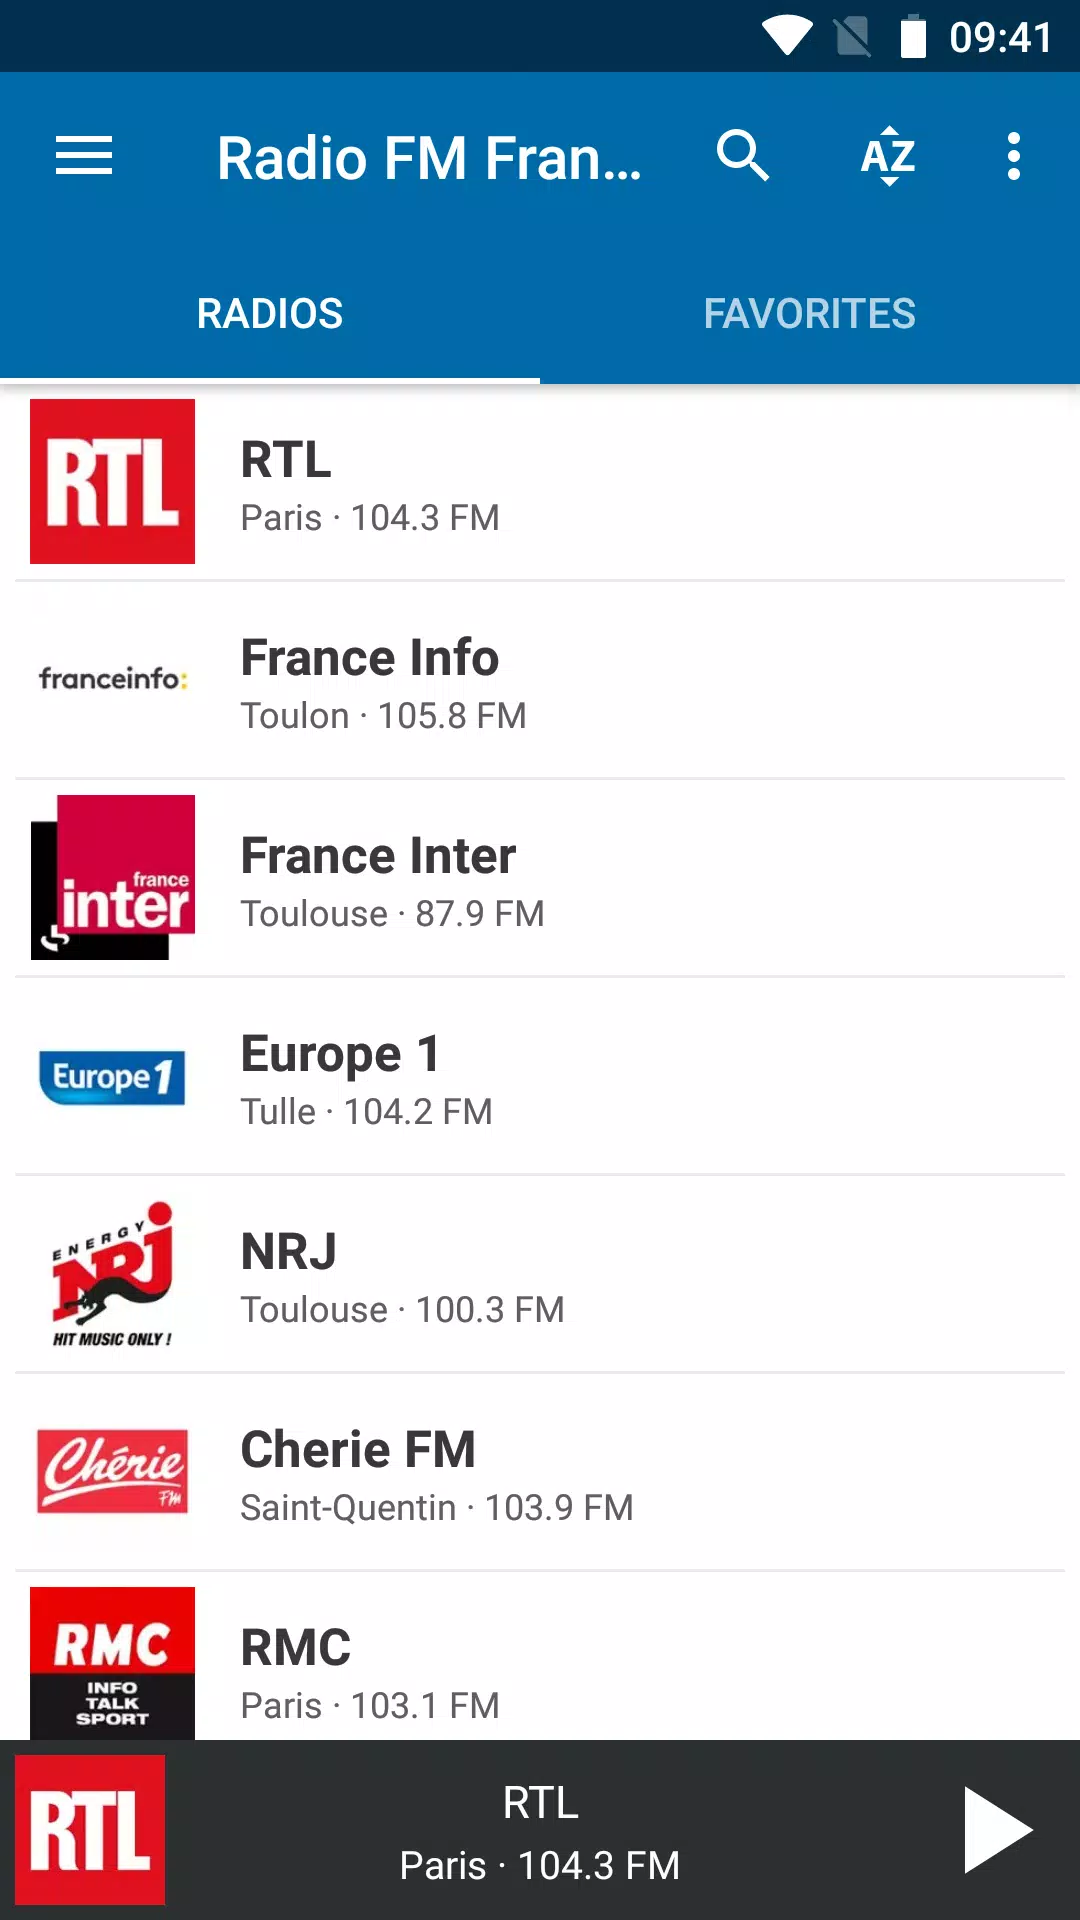 Radio FM France for Android - APK Download